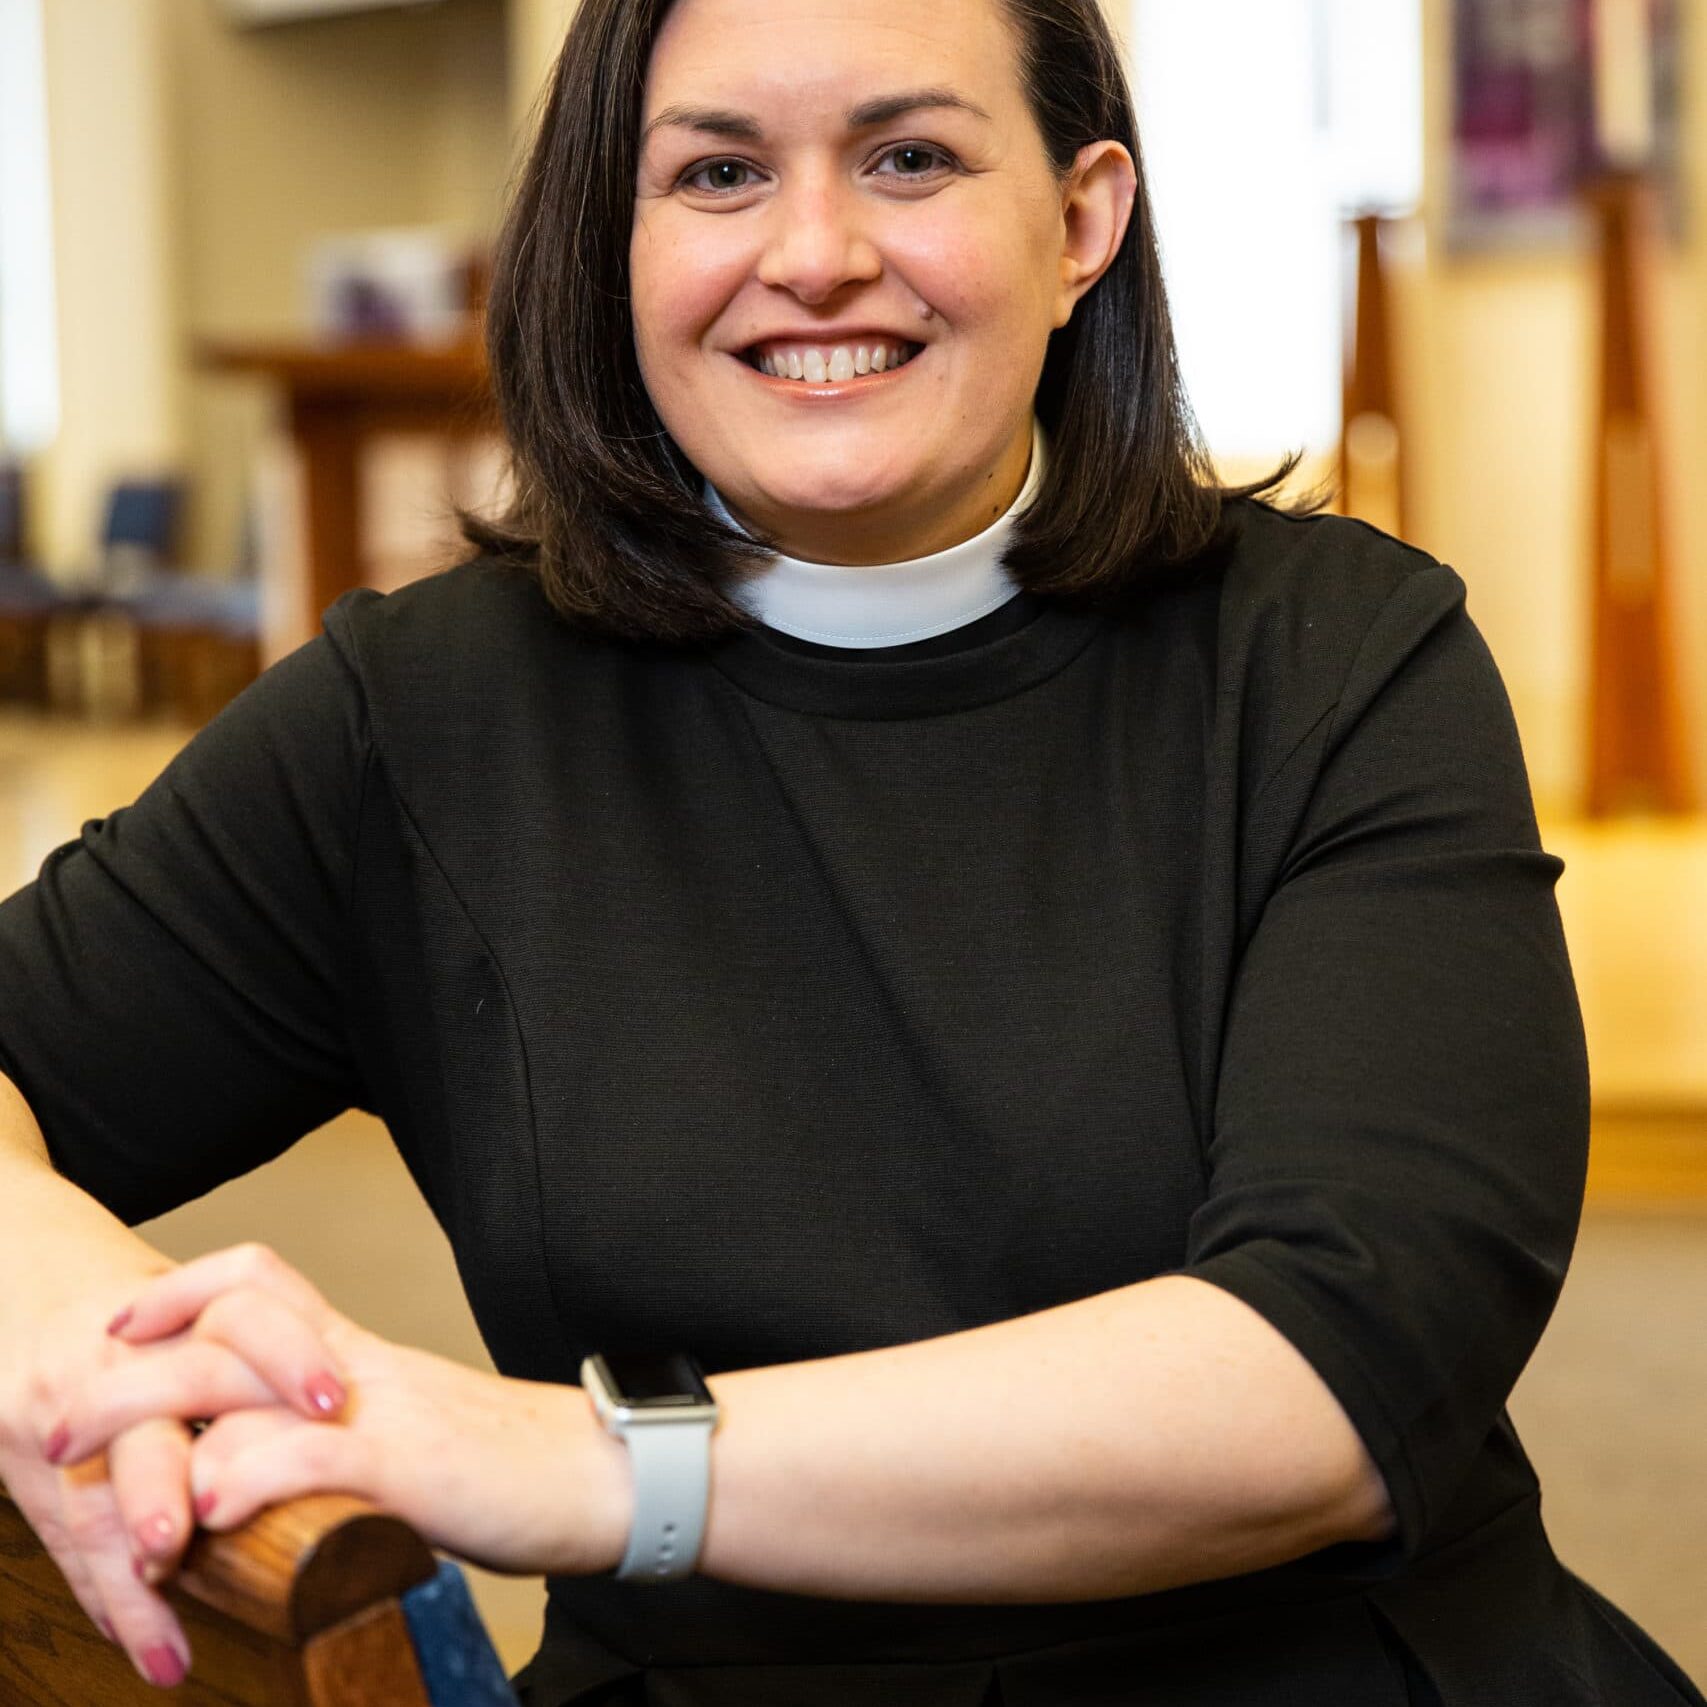 03.27.22 - Burke, Virginia - Pastor Meredith Lovell Keseley leads Abiding Presence Lutheran Church in Burke, Virginia. The church in the Metro DC Synod has a rich history of growing and funding leaders through the Fund for Leaders.